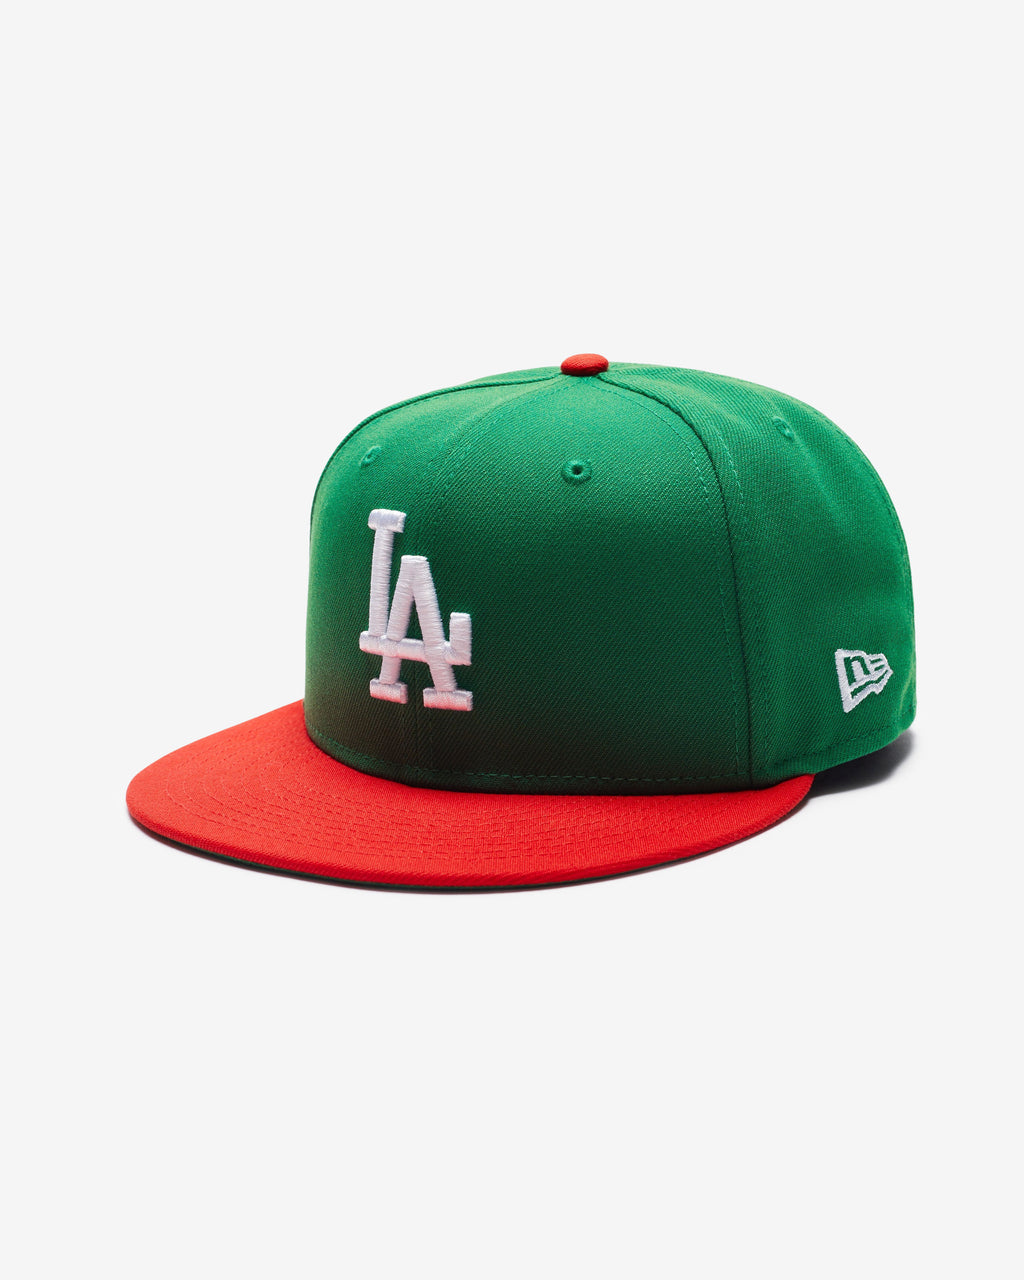 UNDEFEATED X NEW ERA DODGERS FITTED - KELLY GREEN